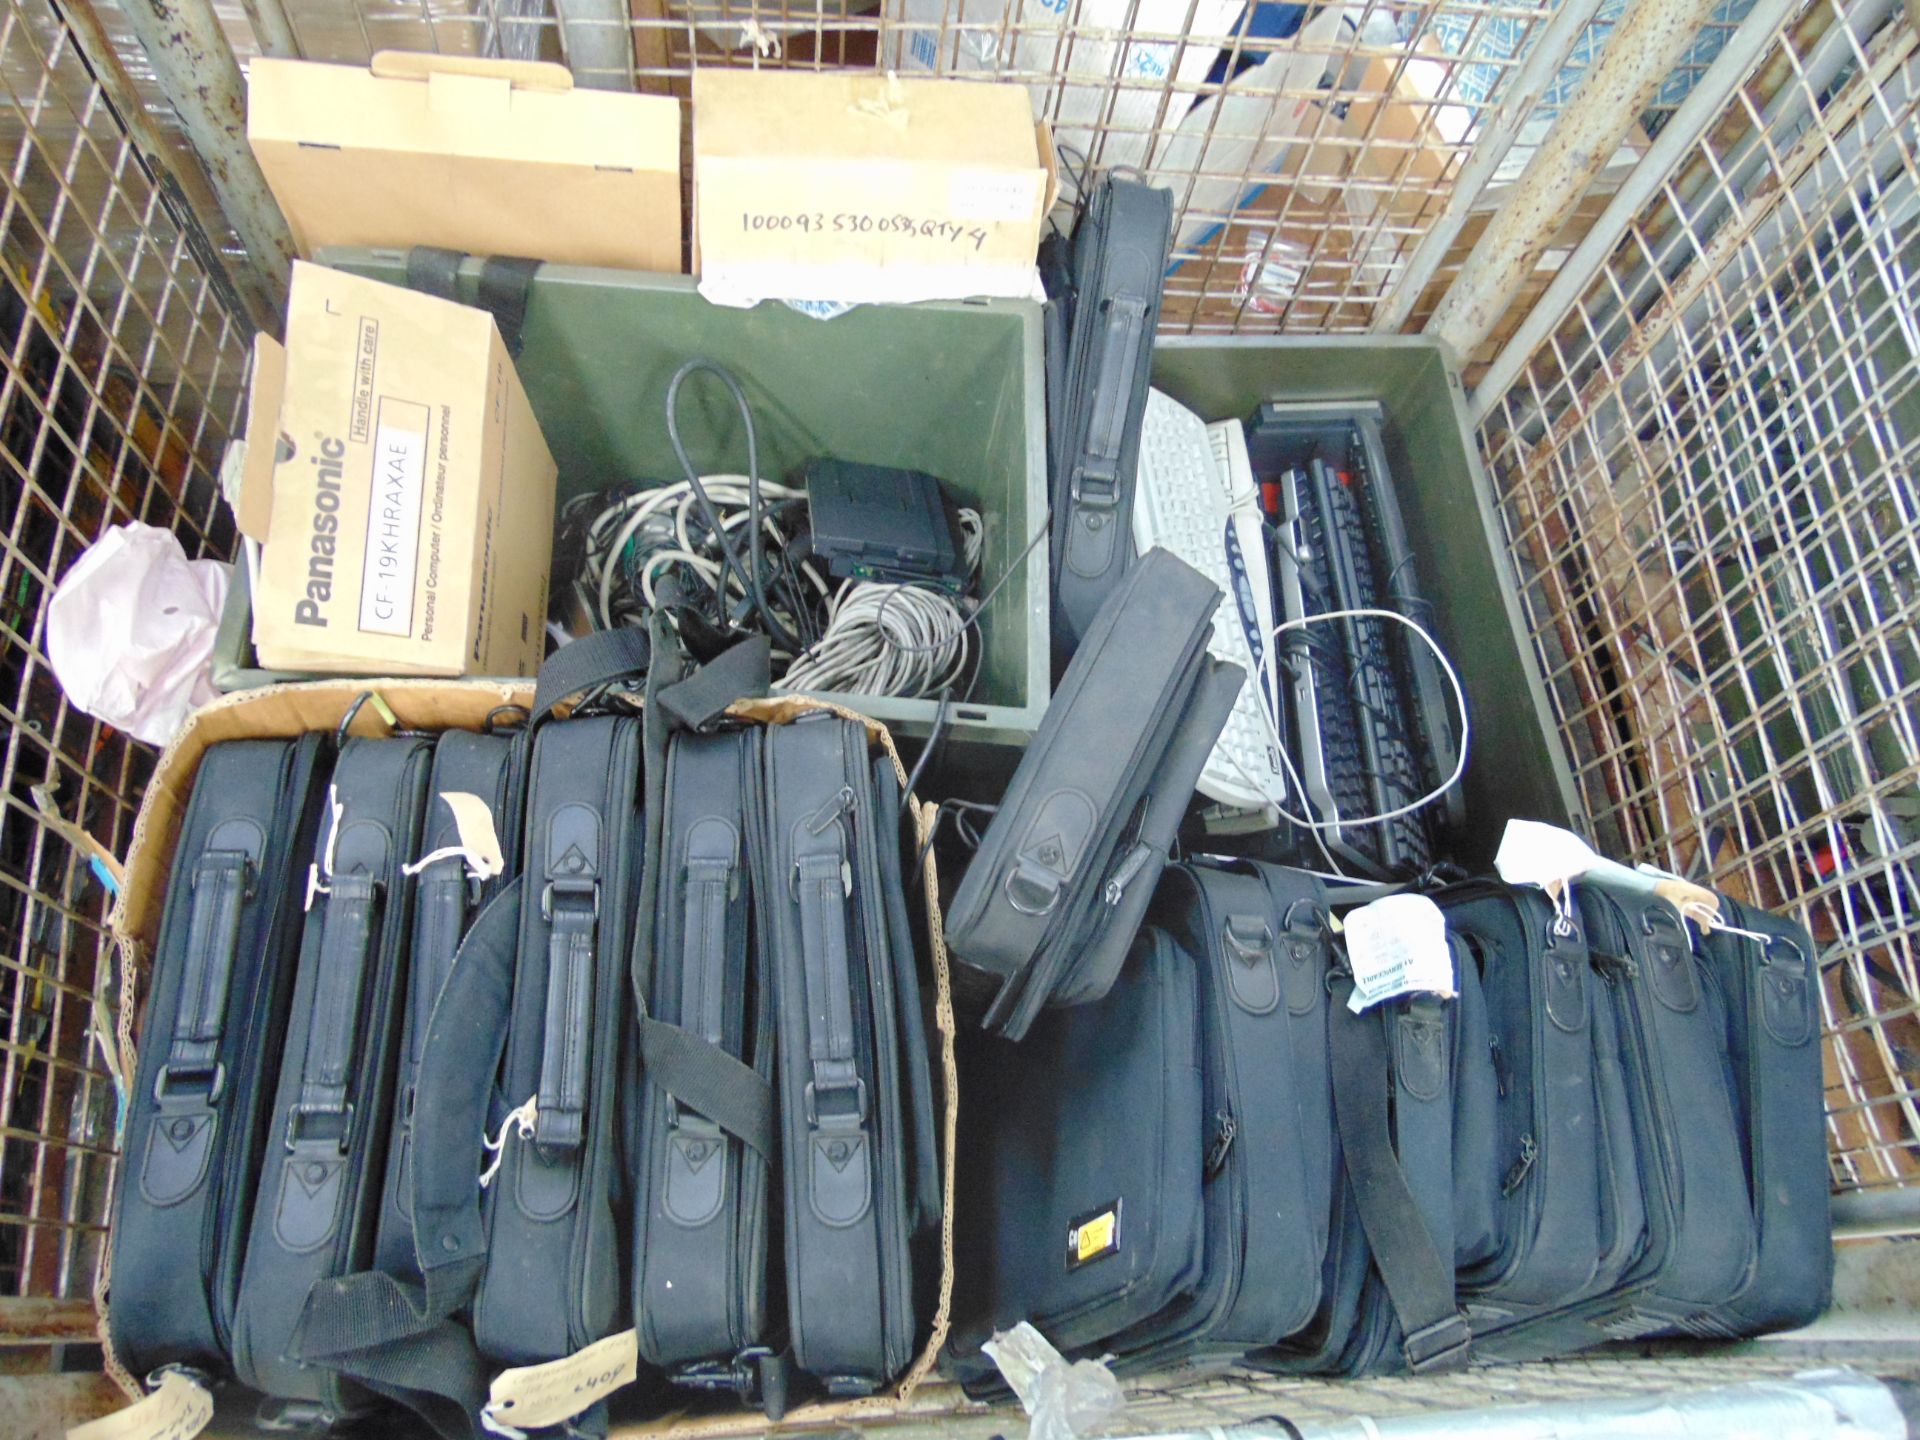 Mixed Stillage of Laptop Bags and Computer Equipment